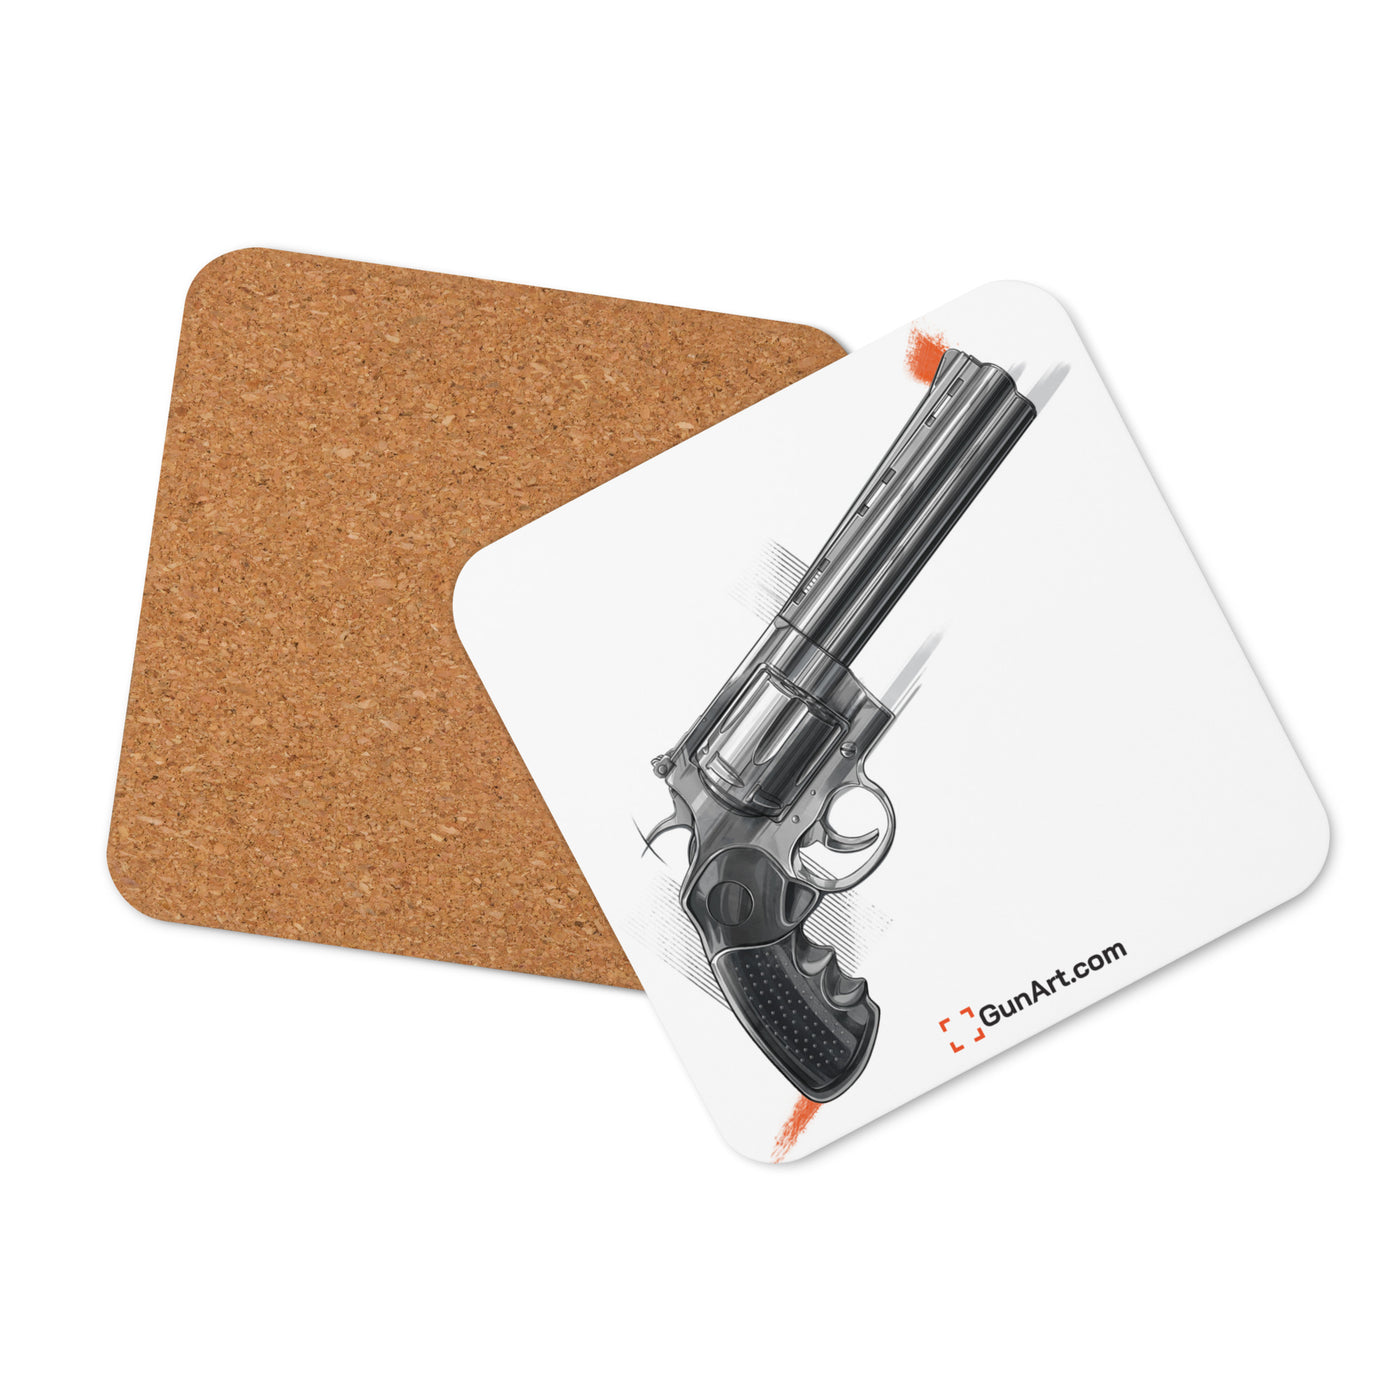 Stainless .44 Mag Revolver Cork-back Coaster - Just The Piece